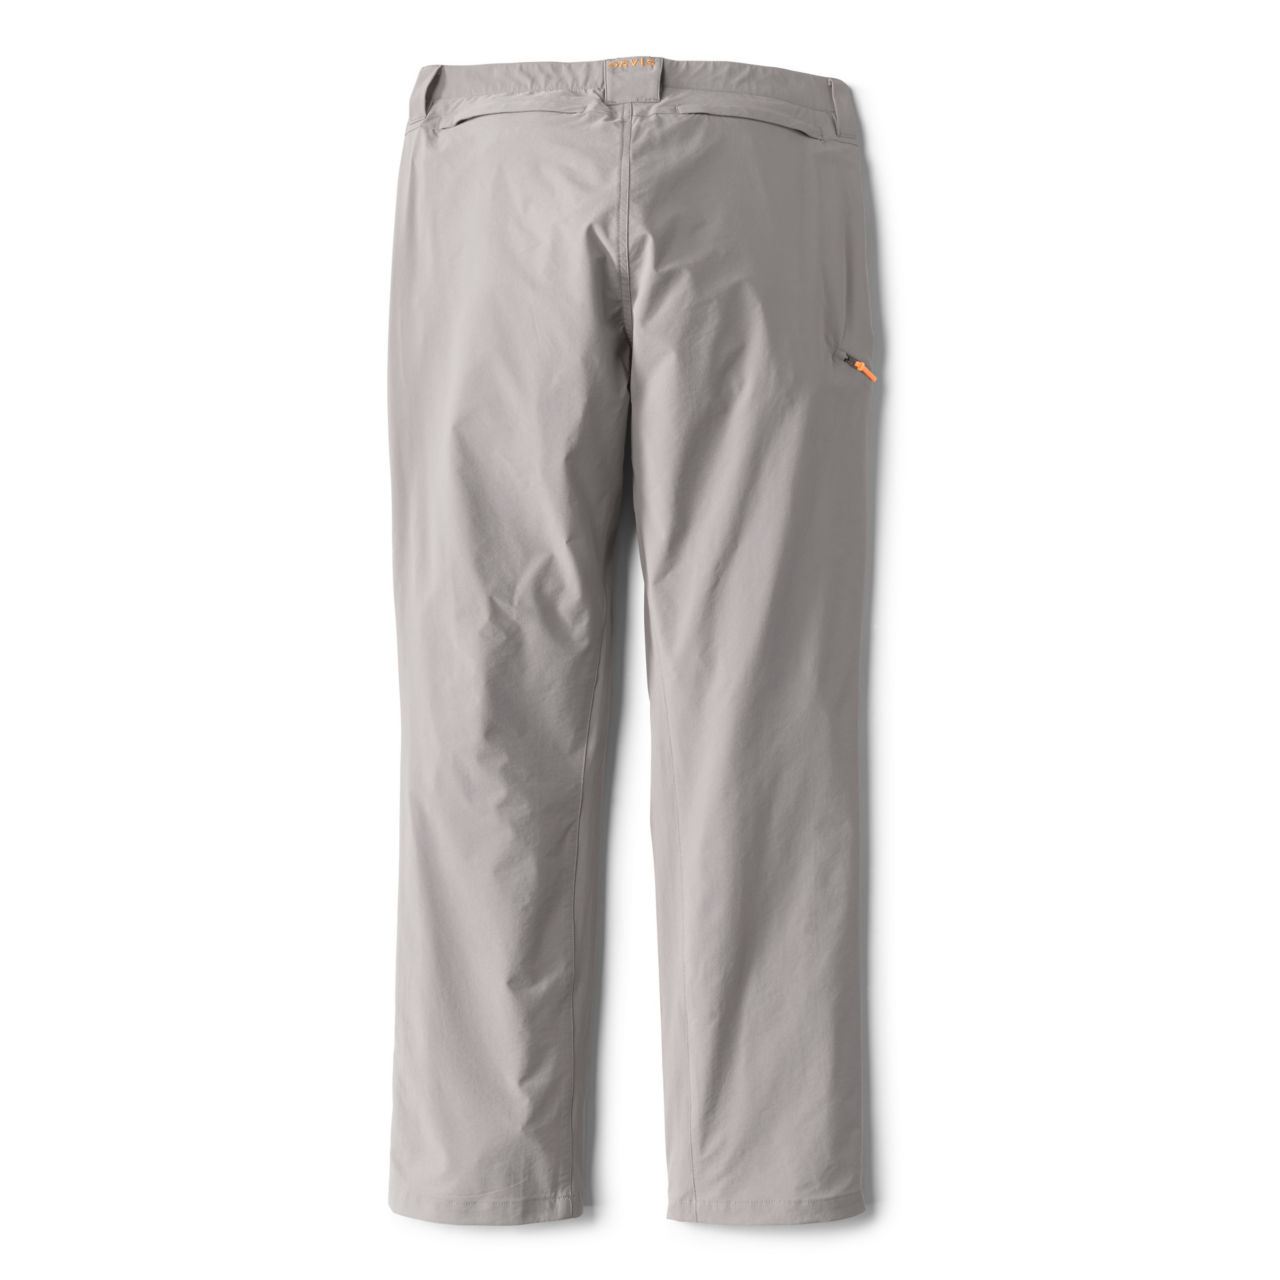 Jackson Quick-Dry Pants -  image number 5